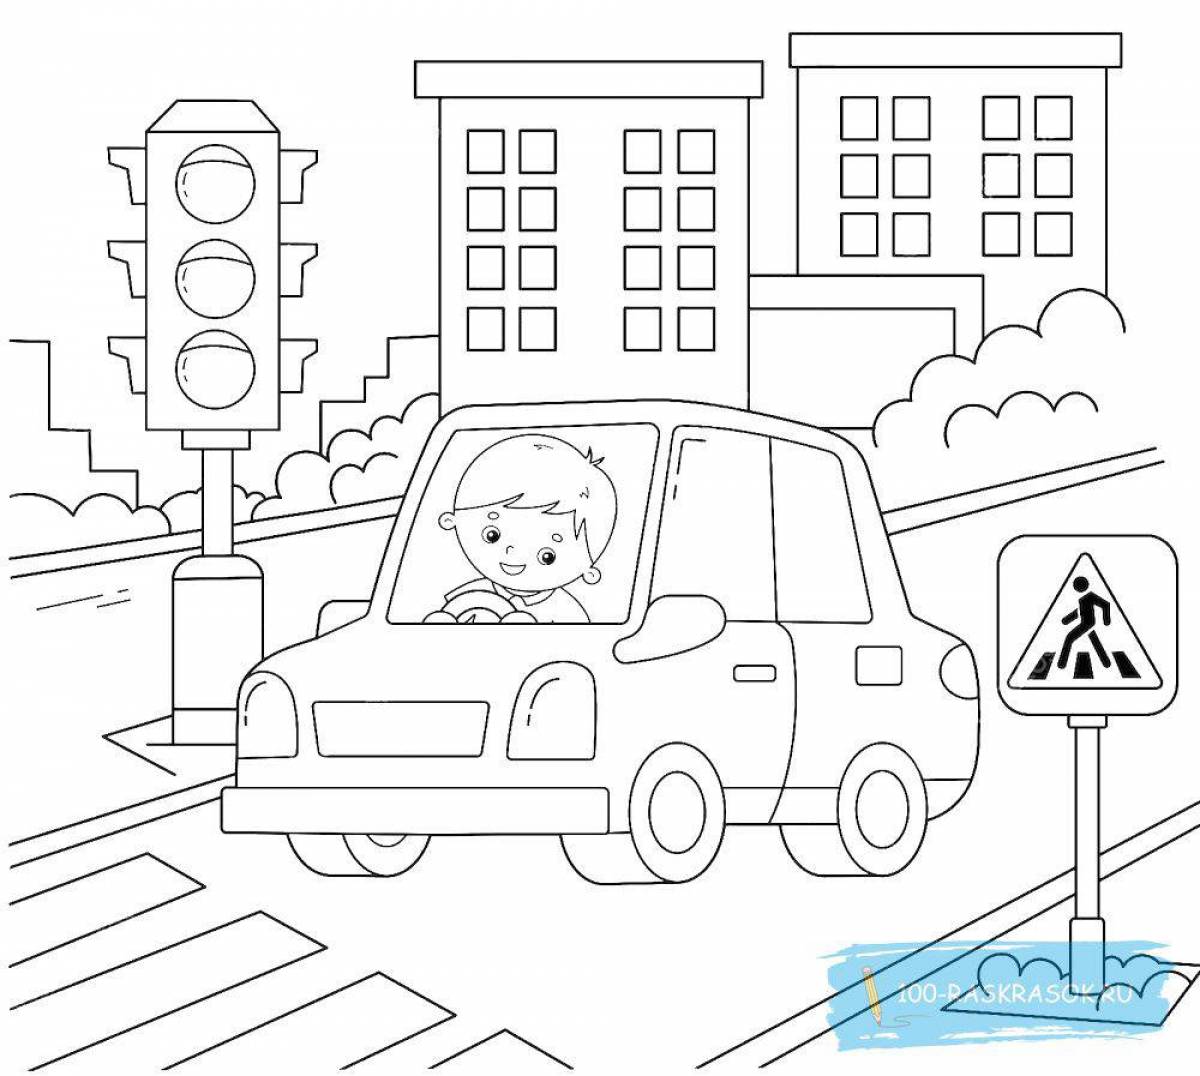 Coloring book happy traffic light for babies 3-4 years old